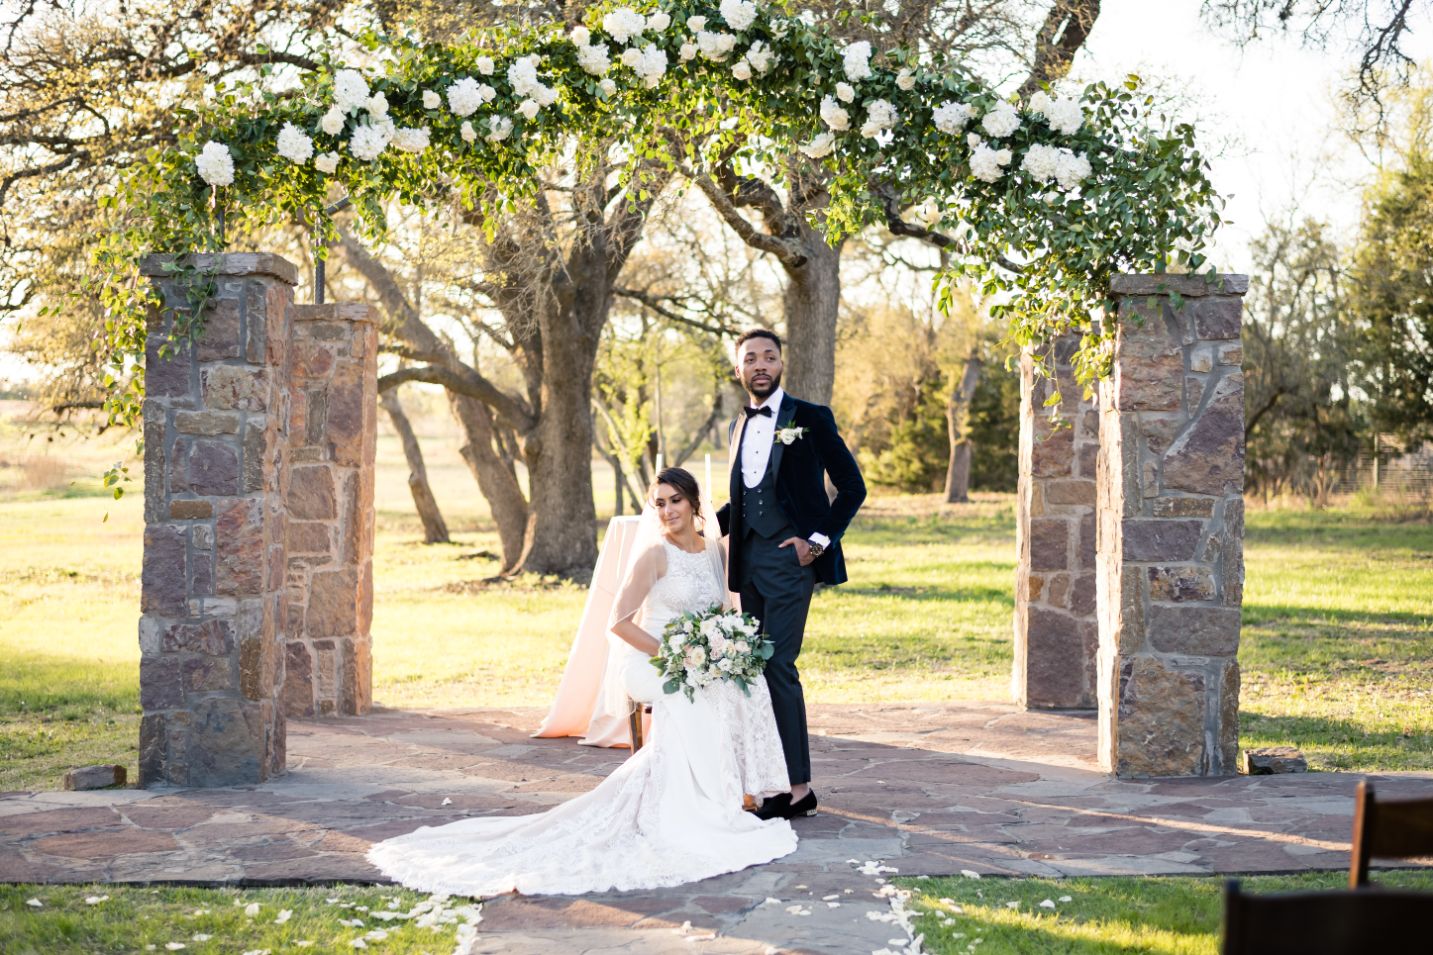 A bride sits in a chair with groom touching her shoulder and looking off into the distance. The stone towers are in the background, with a warm sunset lighting the oak strees.